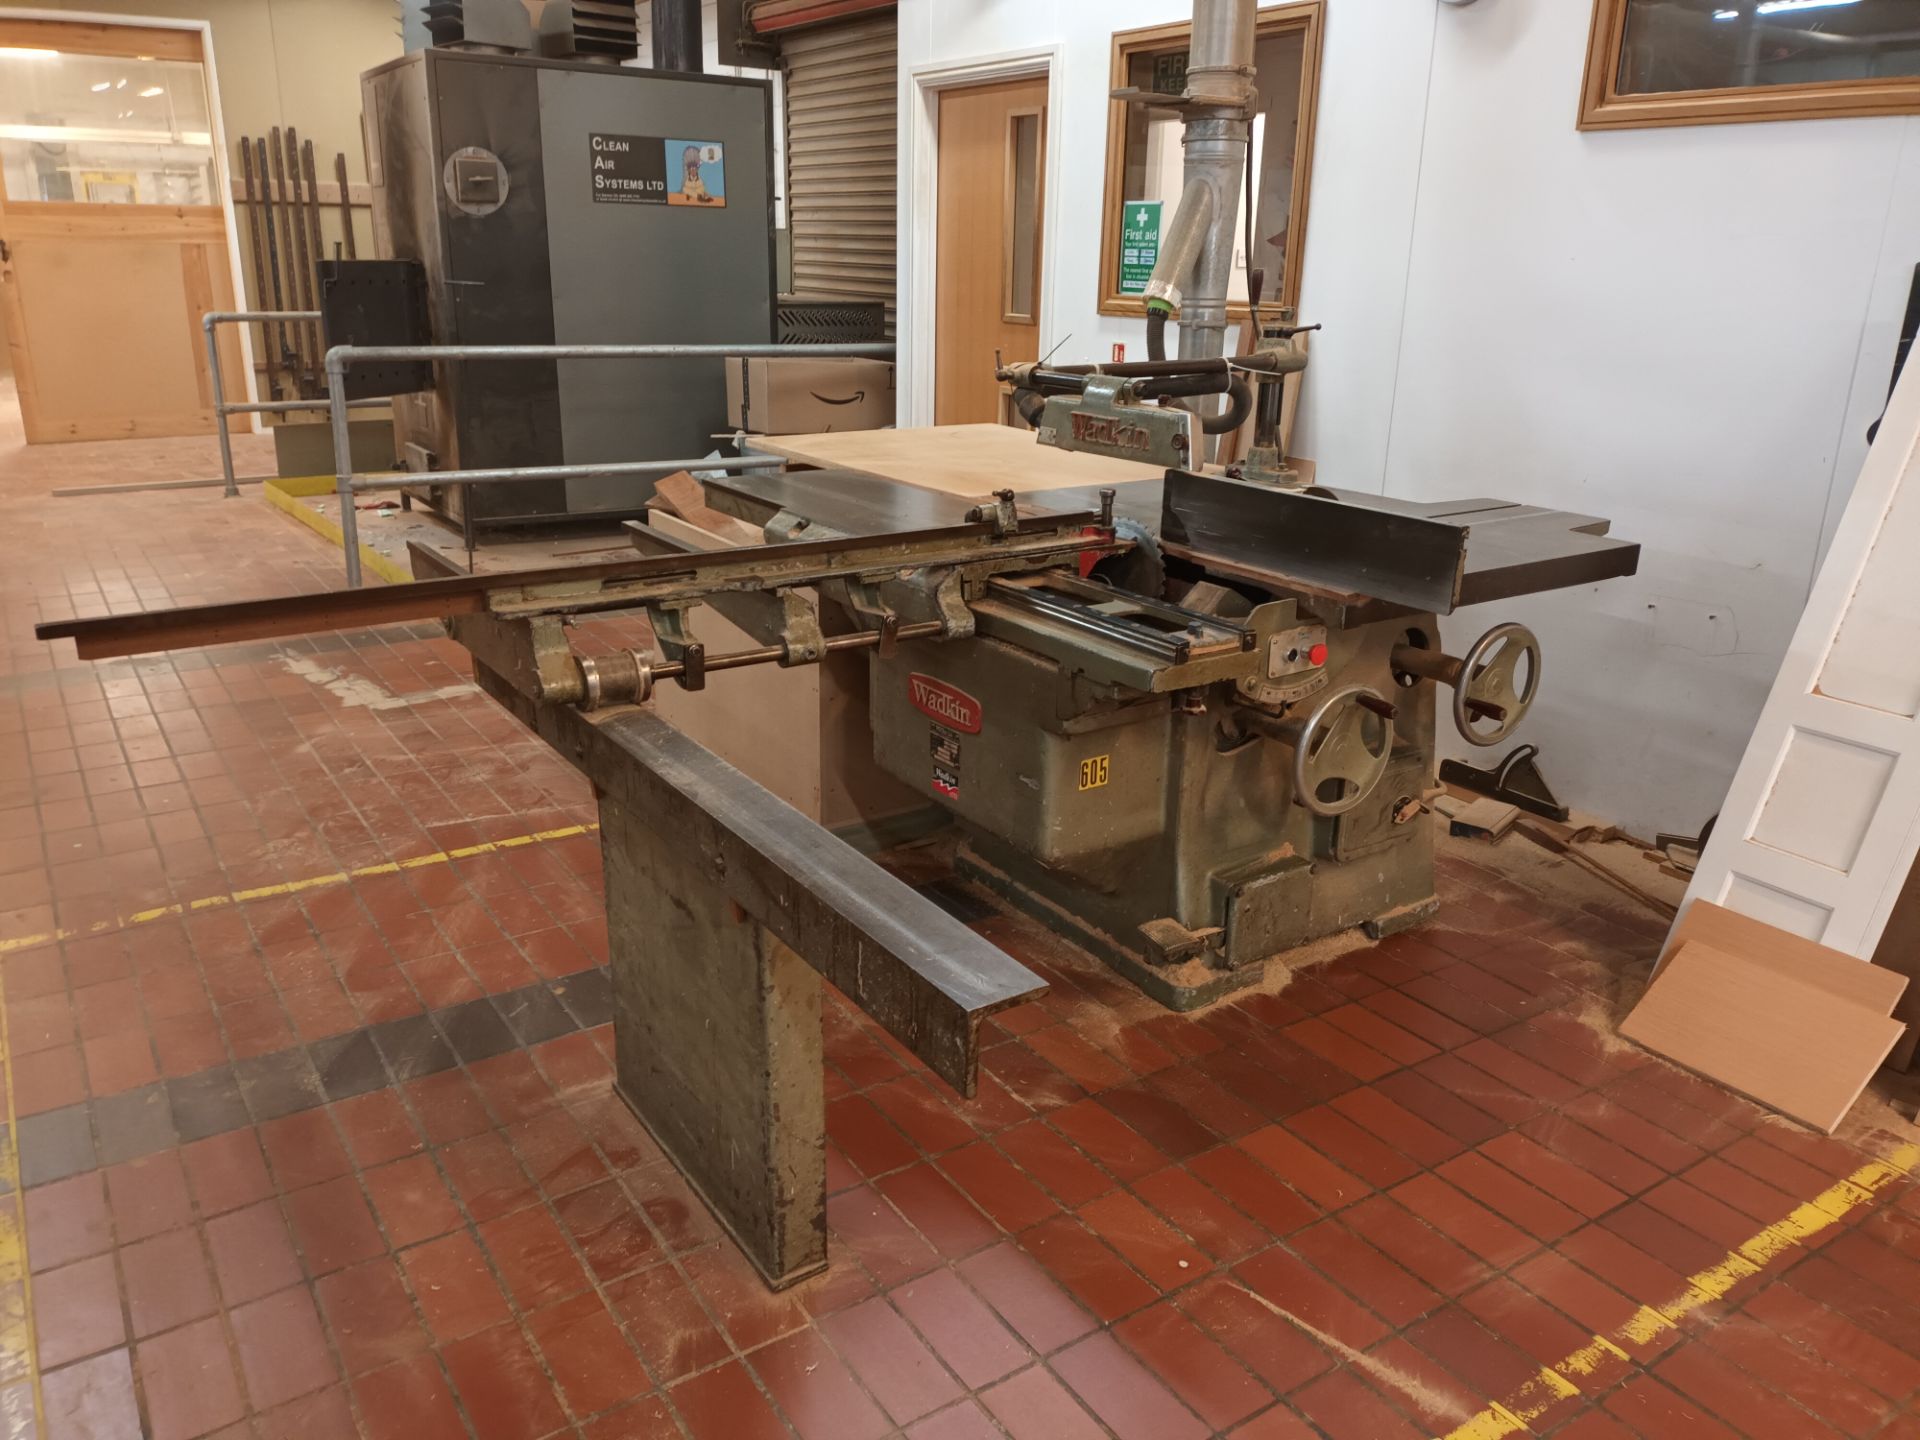 Wadkin PP1143 sliding table saw NB: this item has no CE marking. The Purchaser is required to